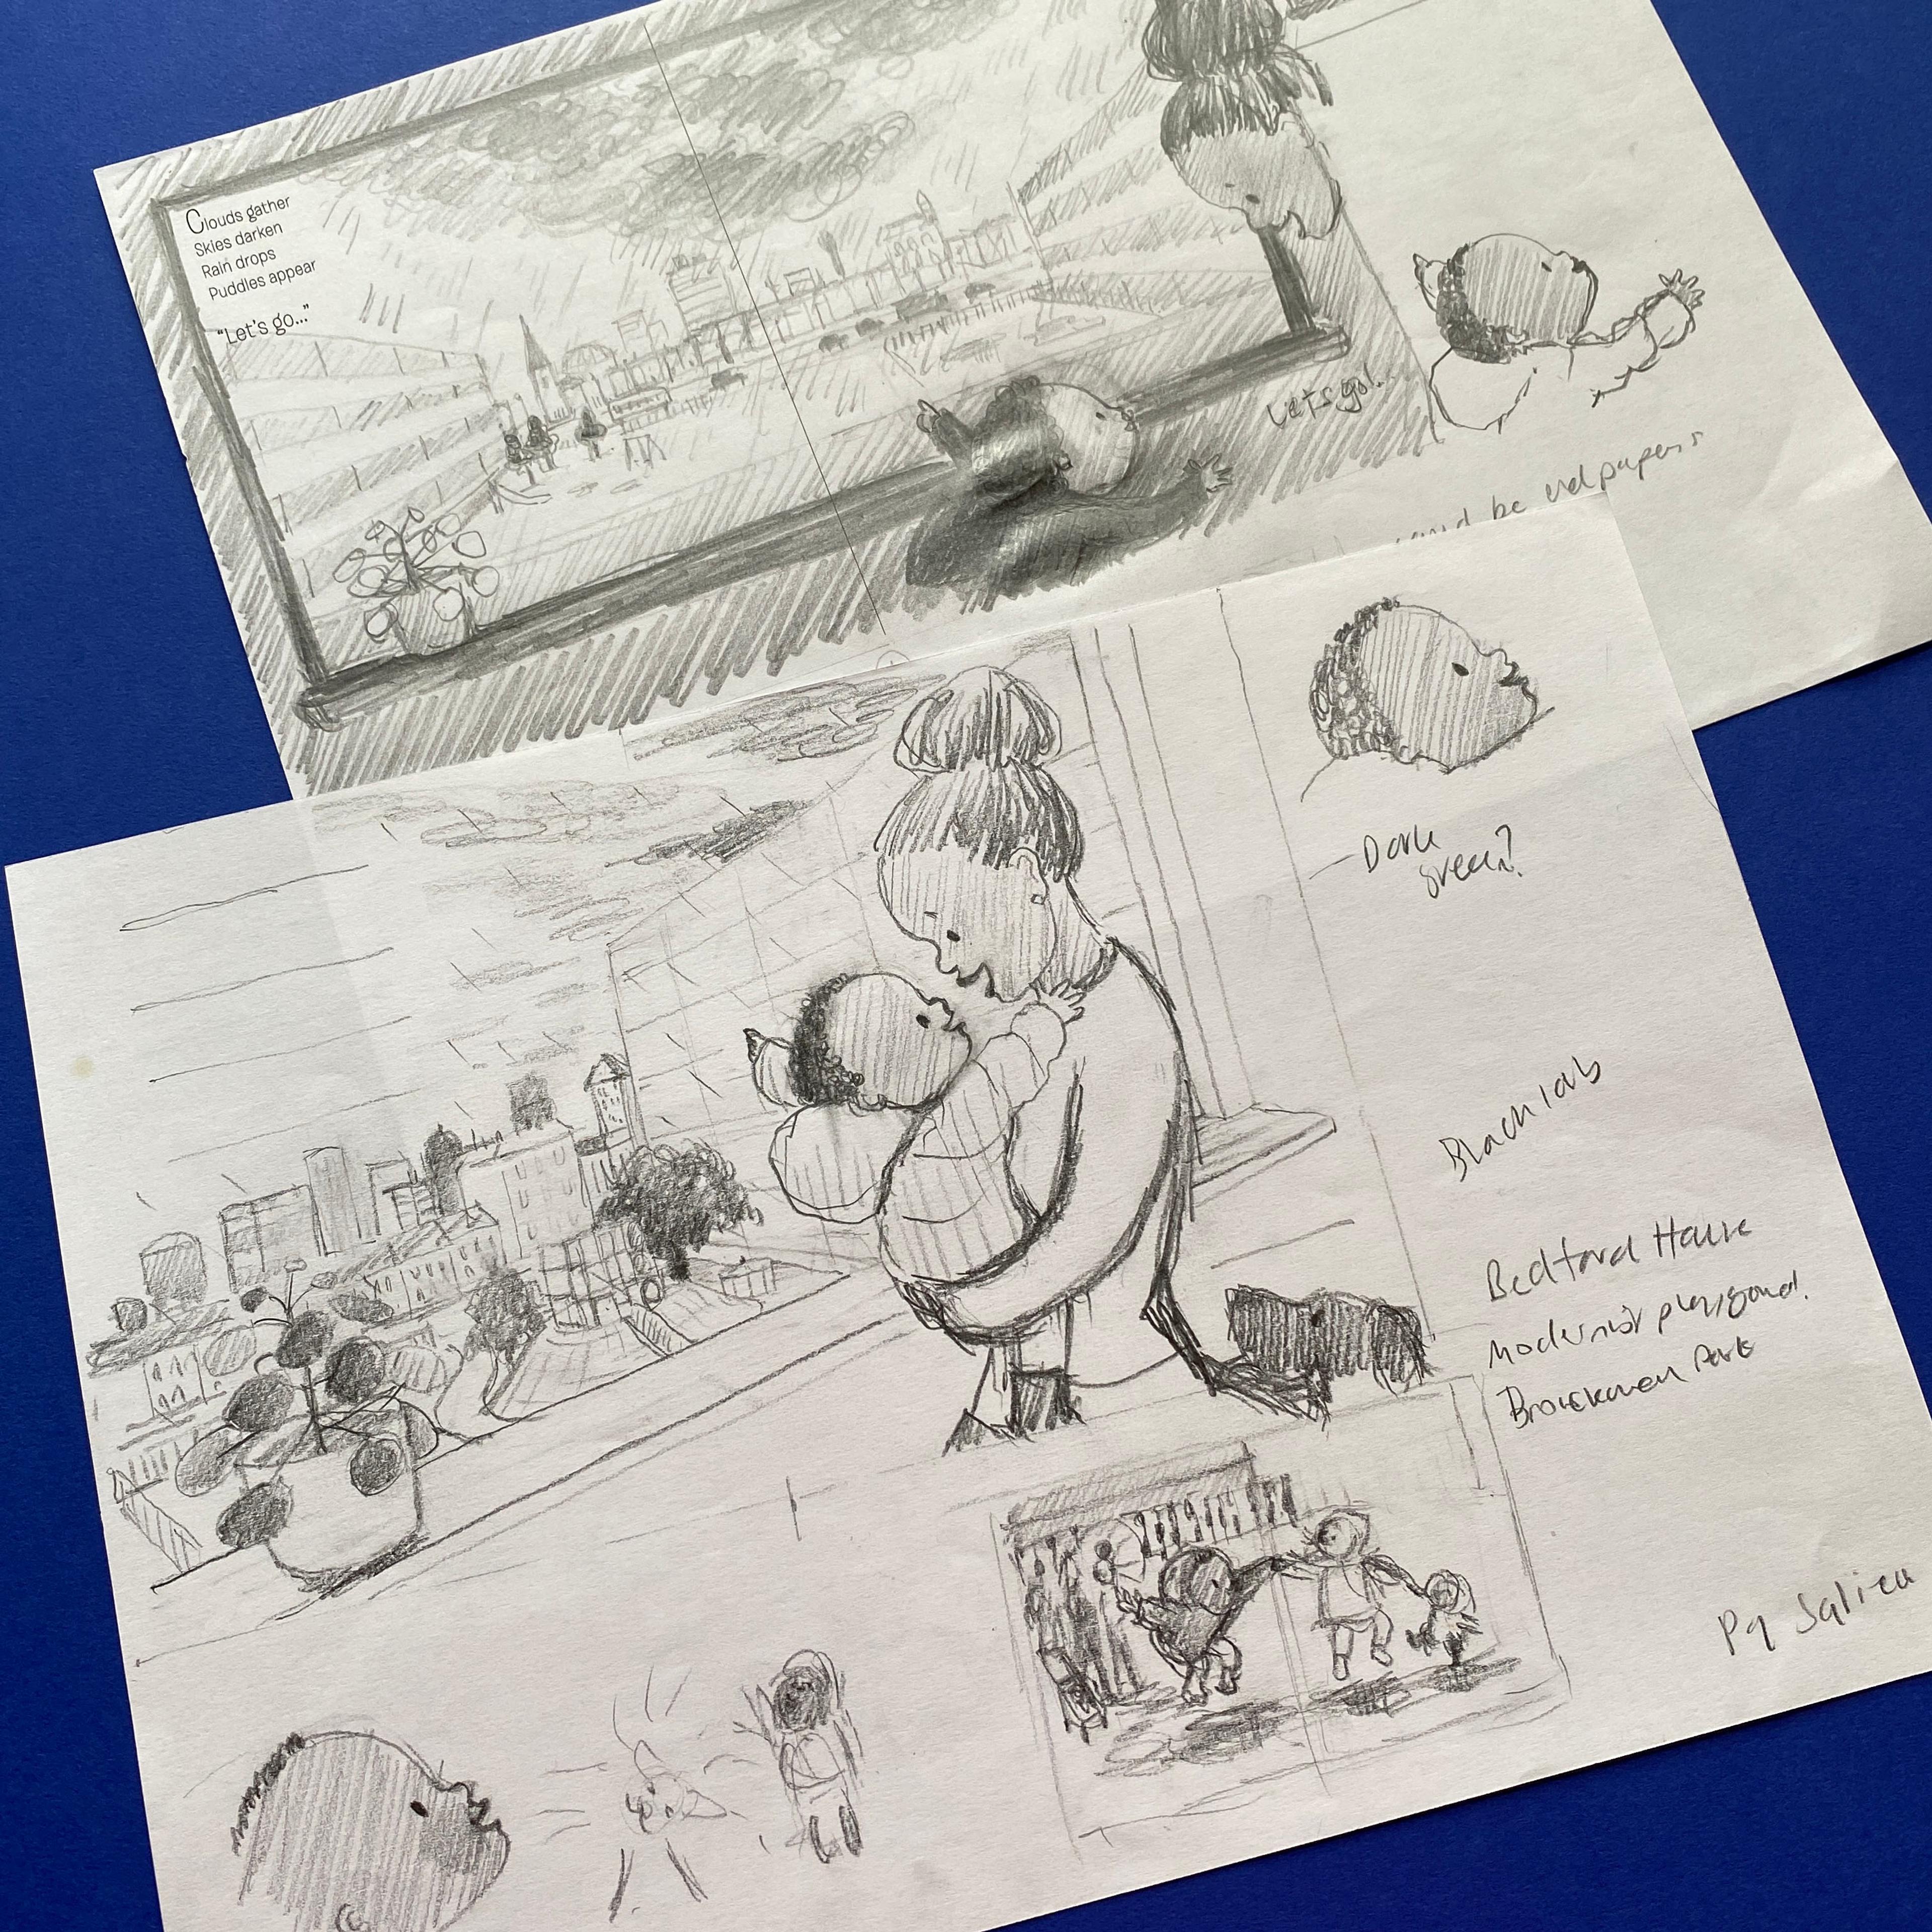 Two sheets of paper with pencil illustrations of work in progress drawings.